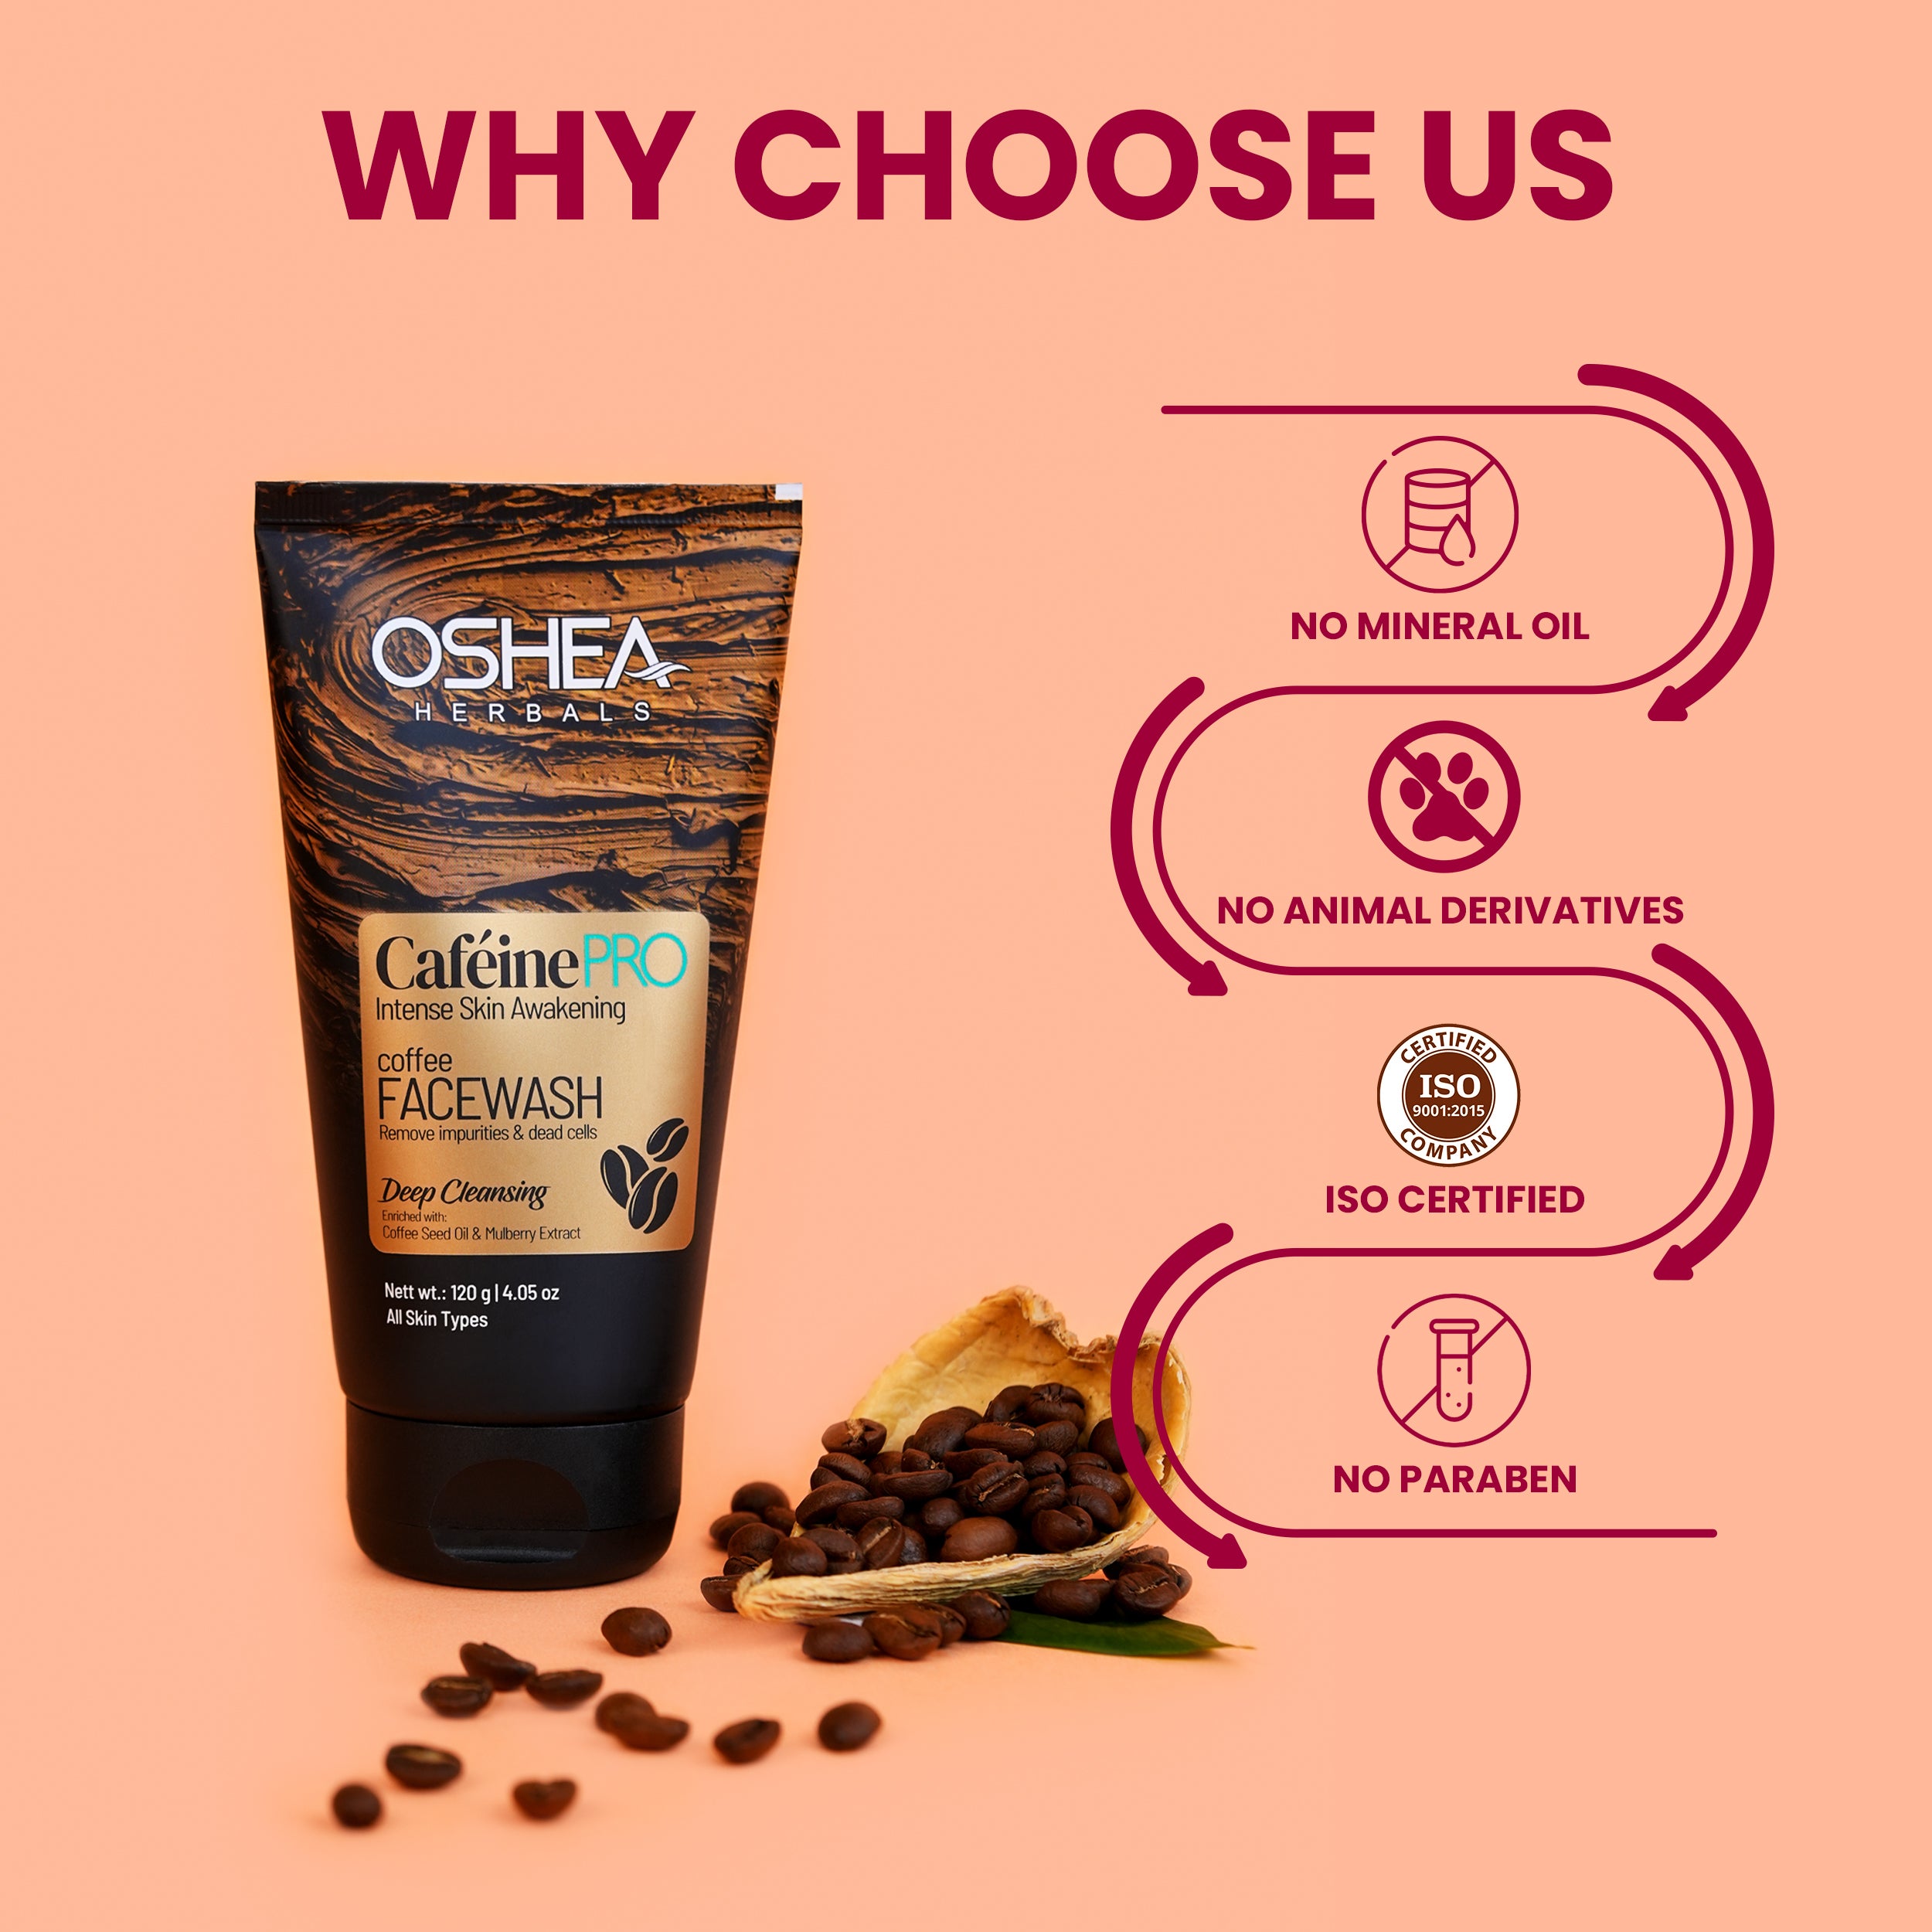 Why choose us Cafeine-pro Face wash Oshea Herbals